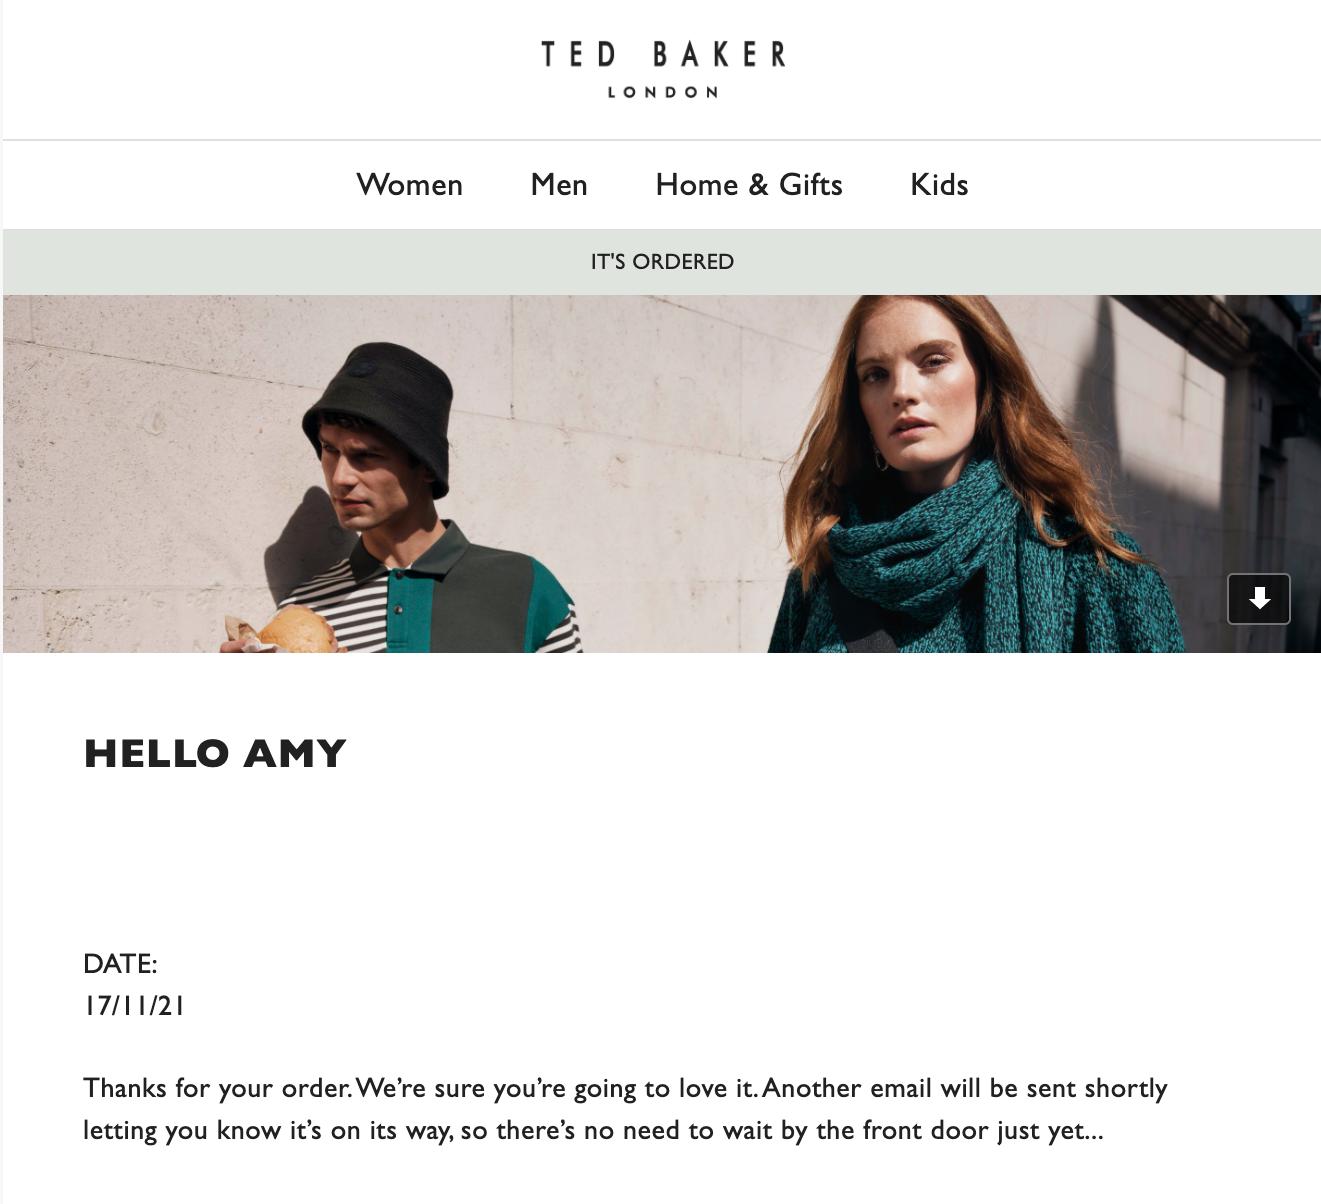 ted baker order confirmation transactional email with humorous copy